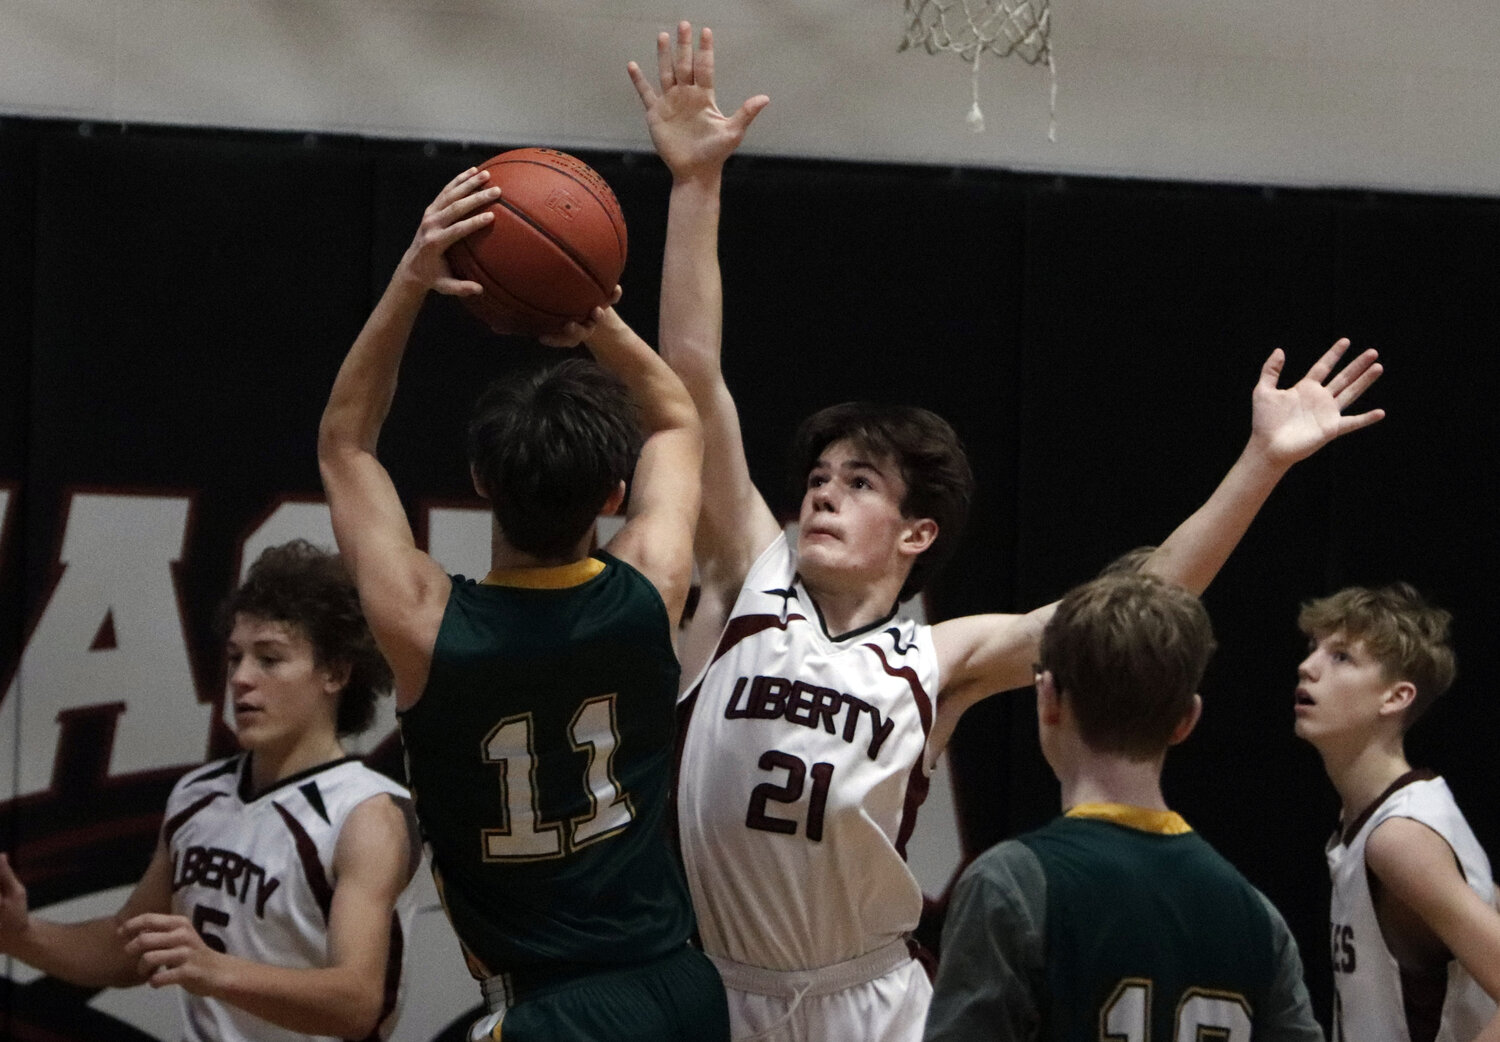 Jack Duvel attempts to block a shot during Liberty Christian's home game against Mississippi Valley Christian.